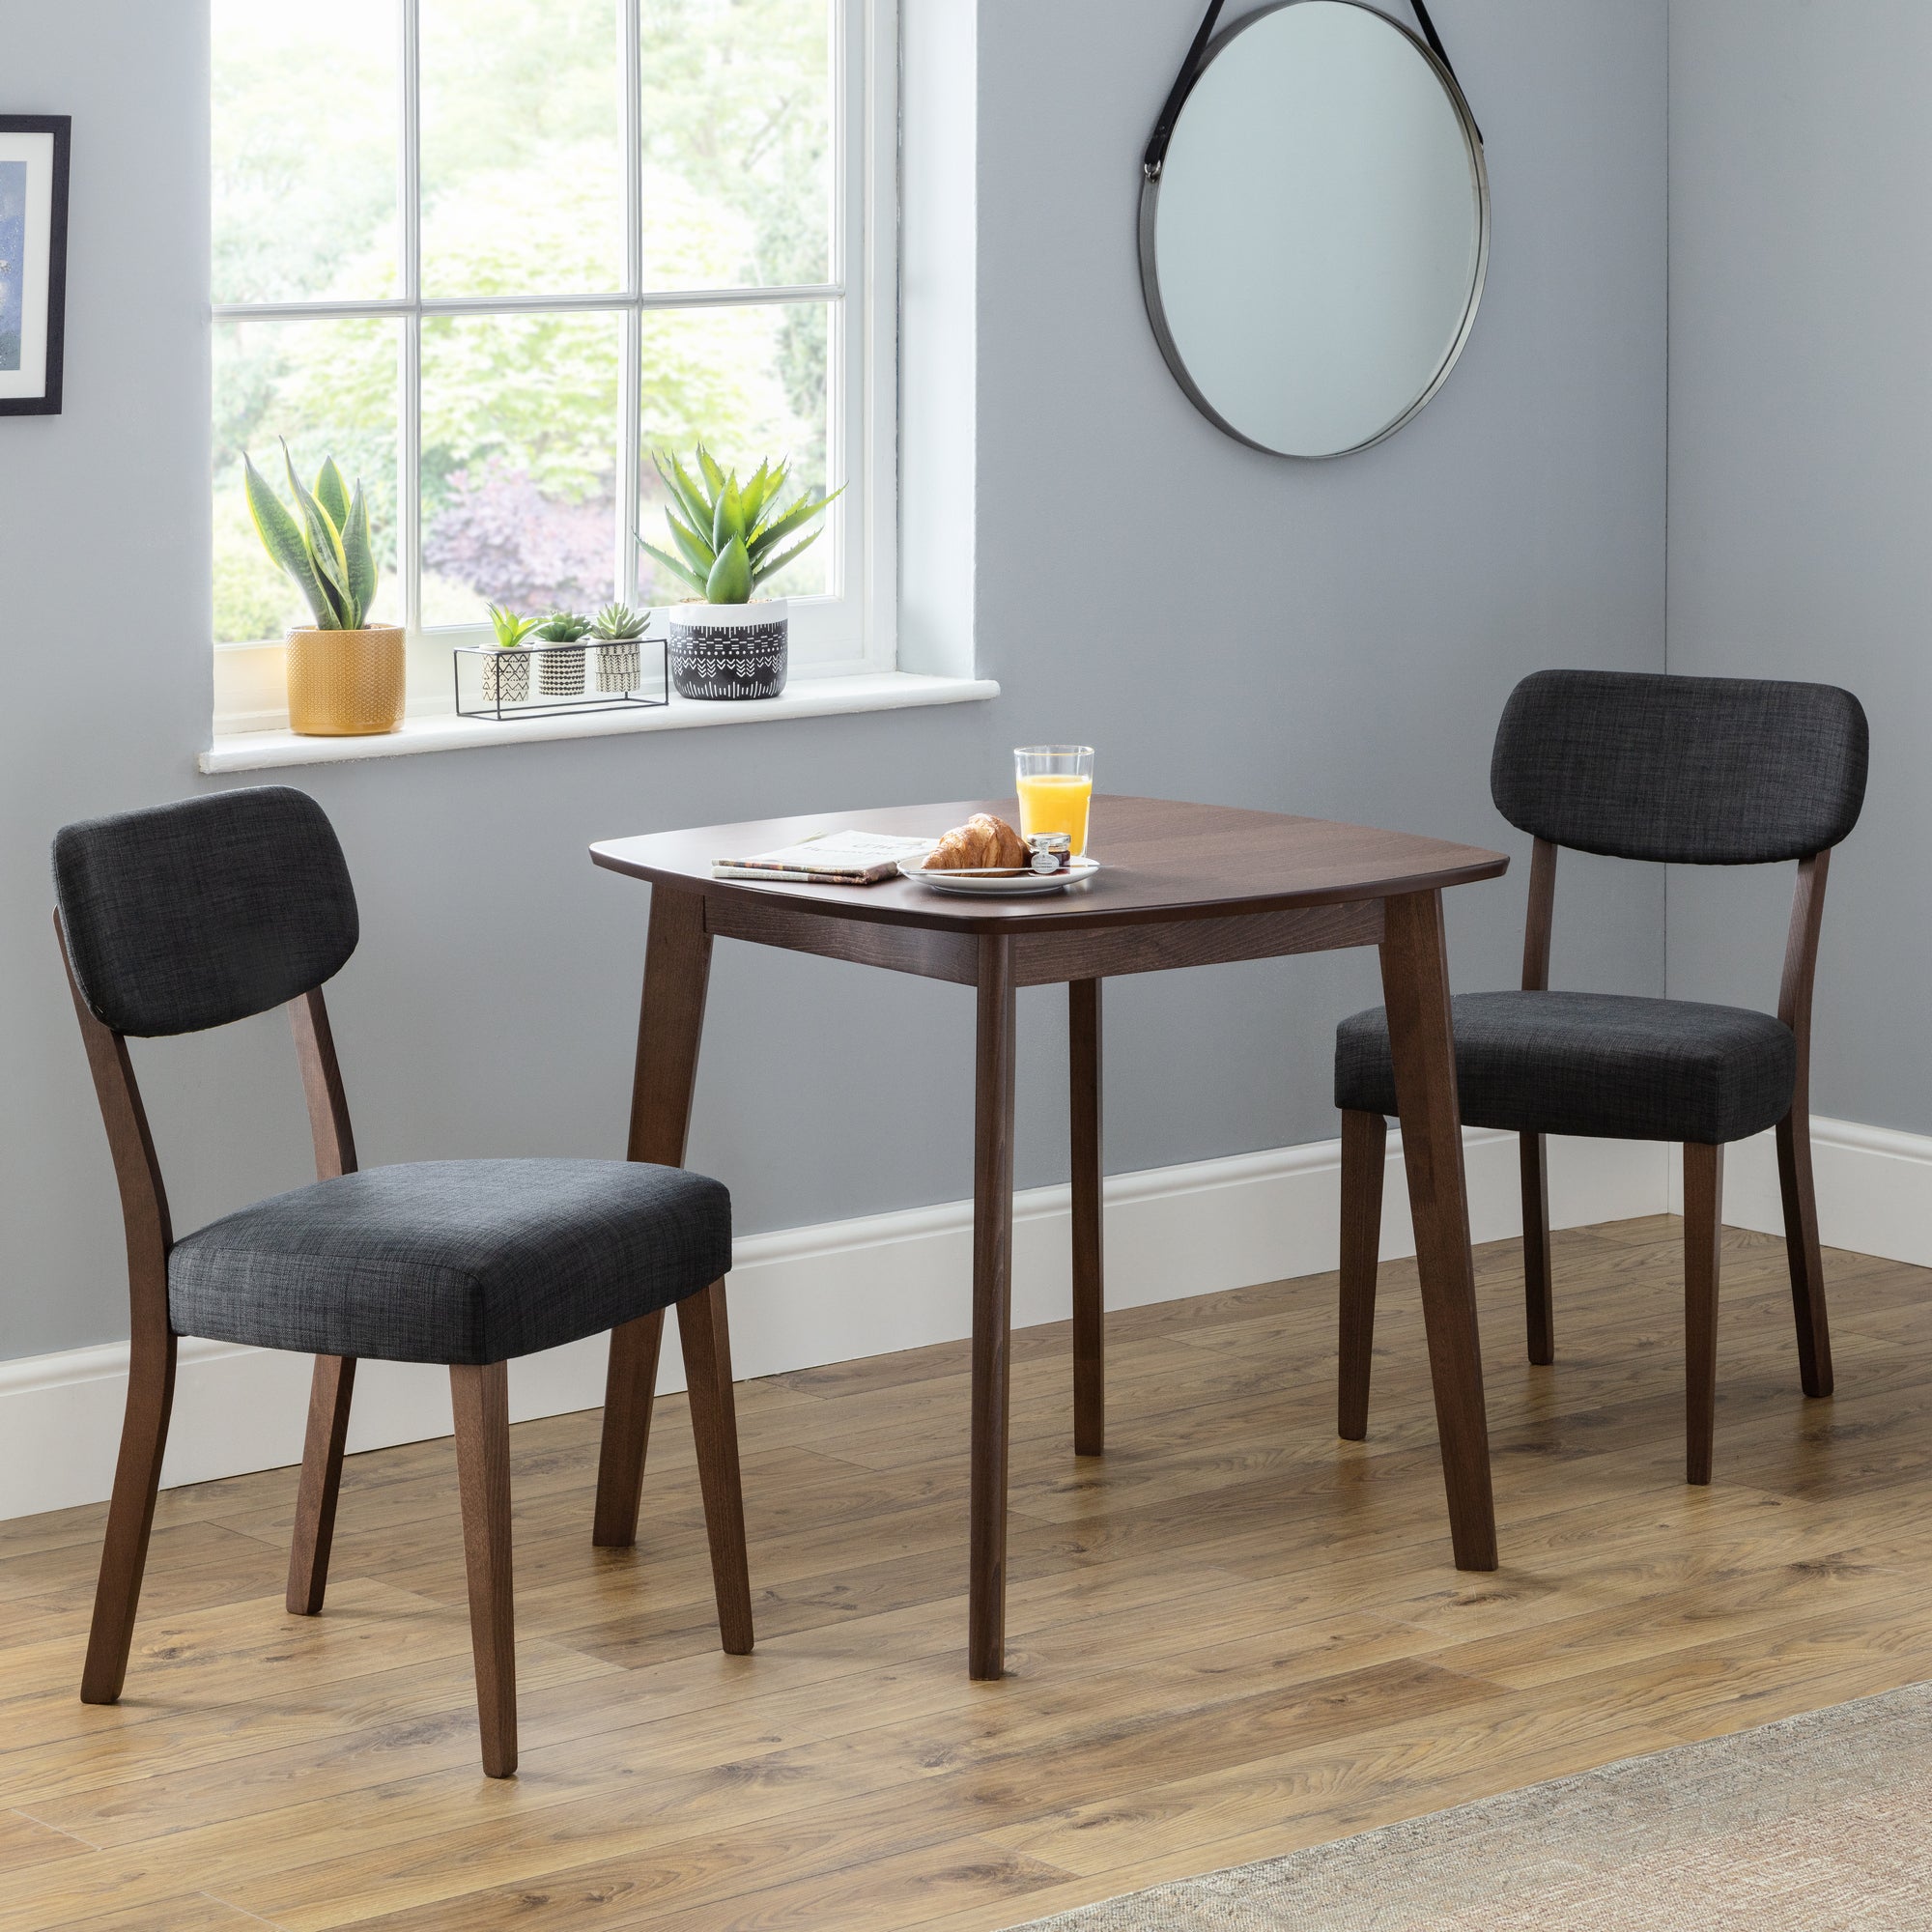 Lennox Square Dining Table with 2 Farringdon Chairs, Beech Wood